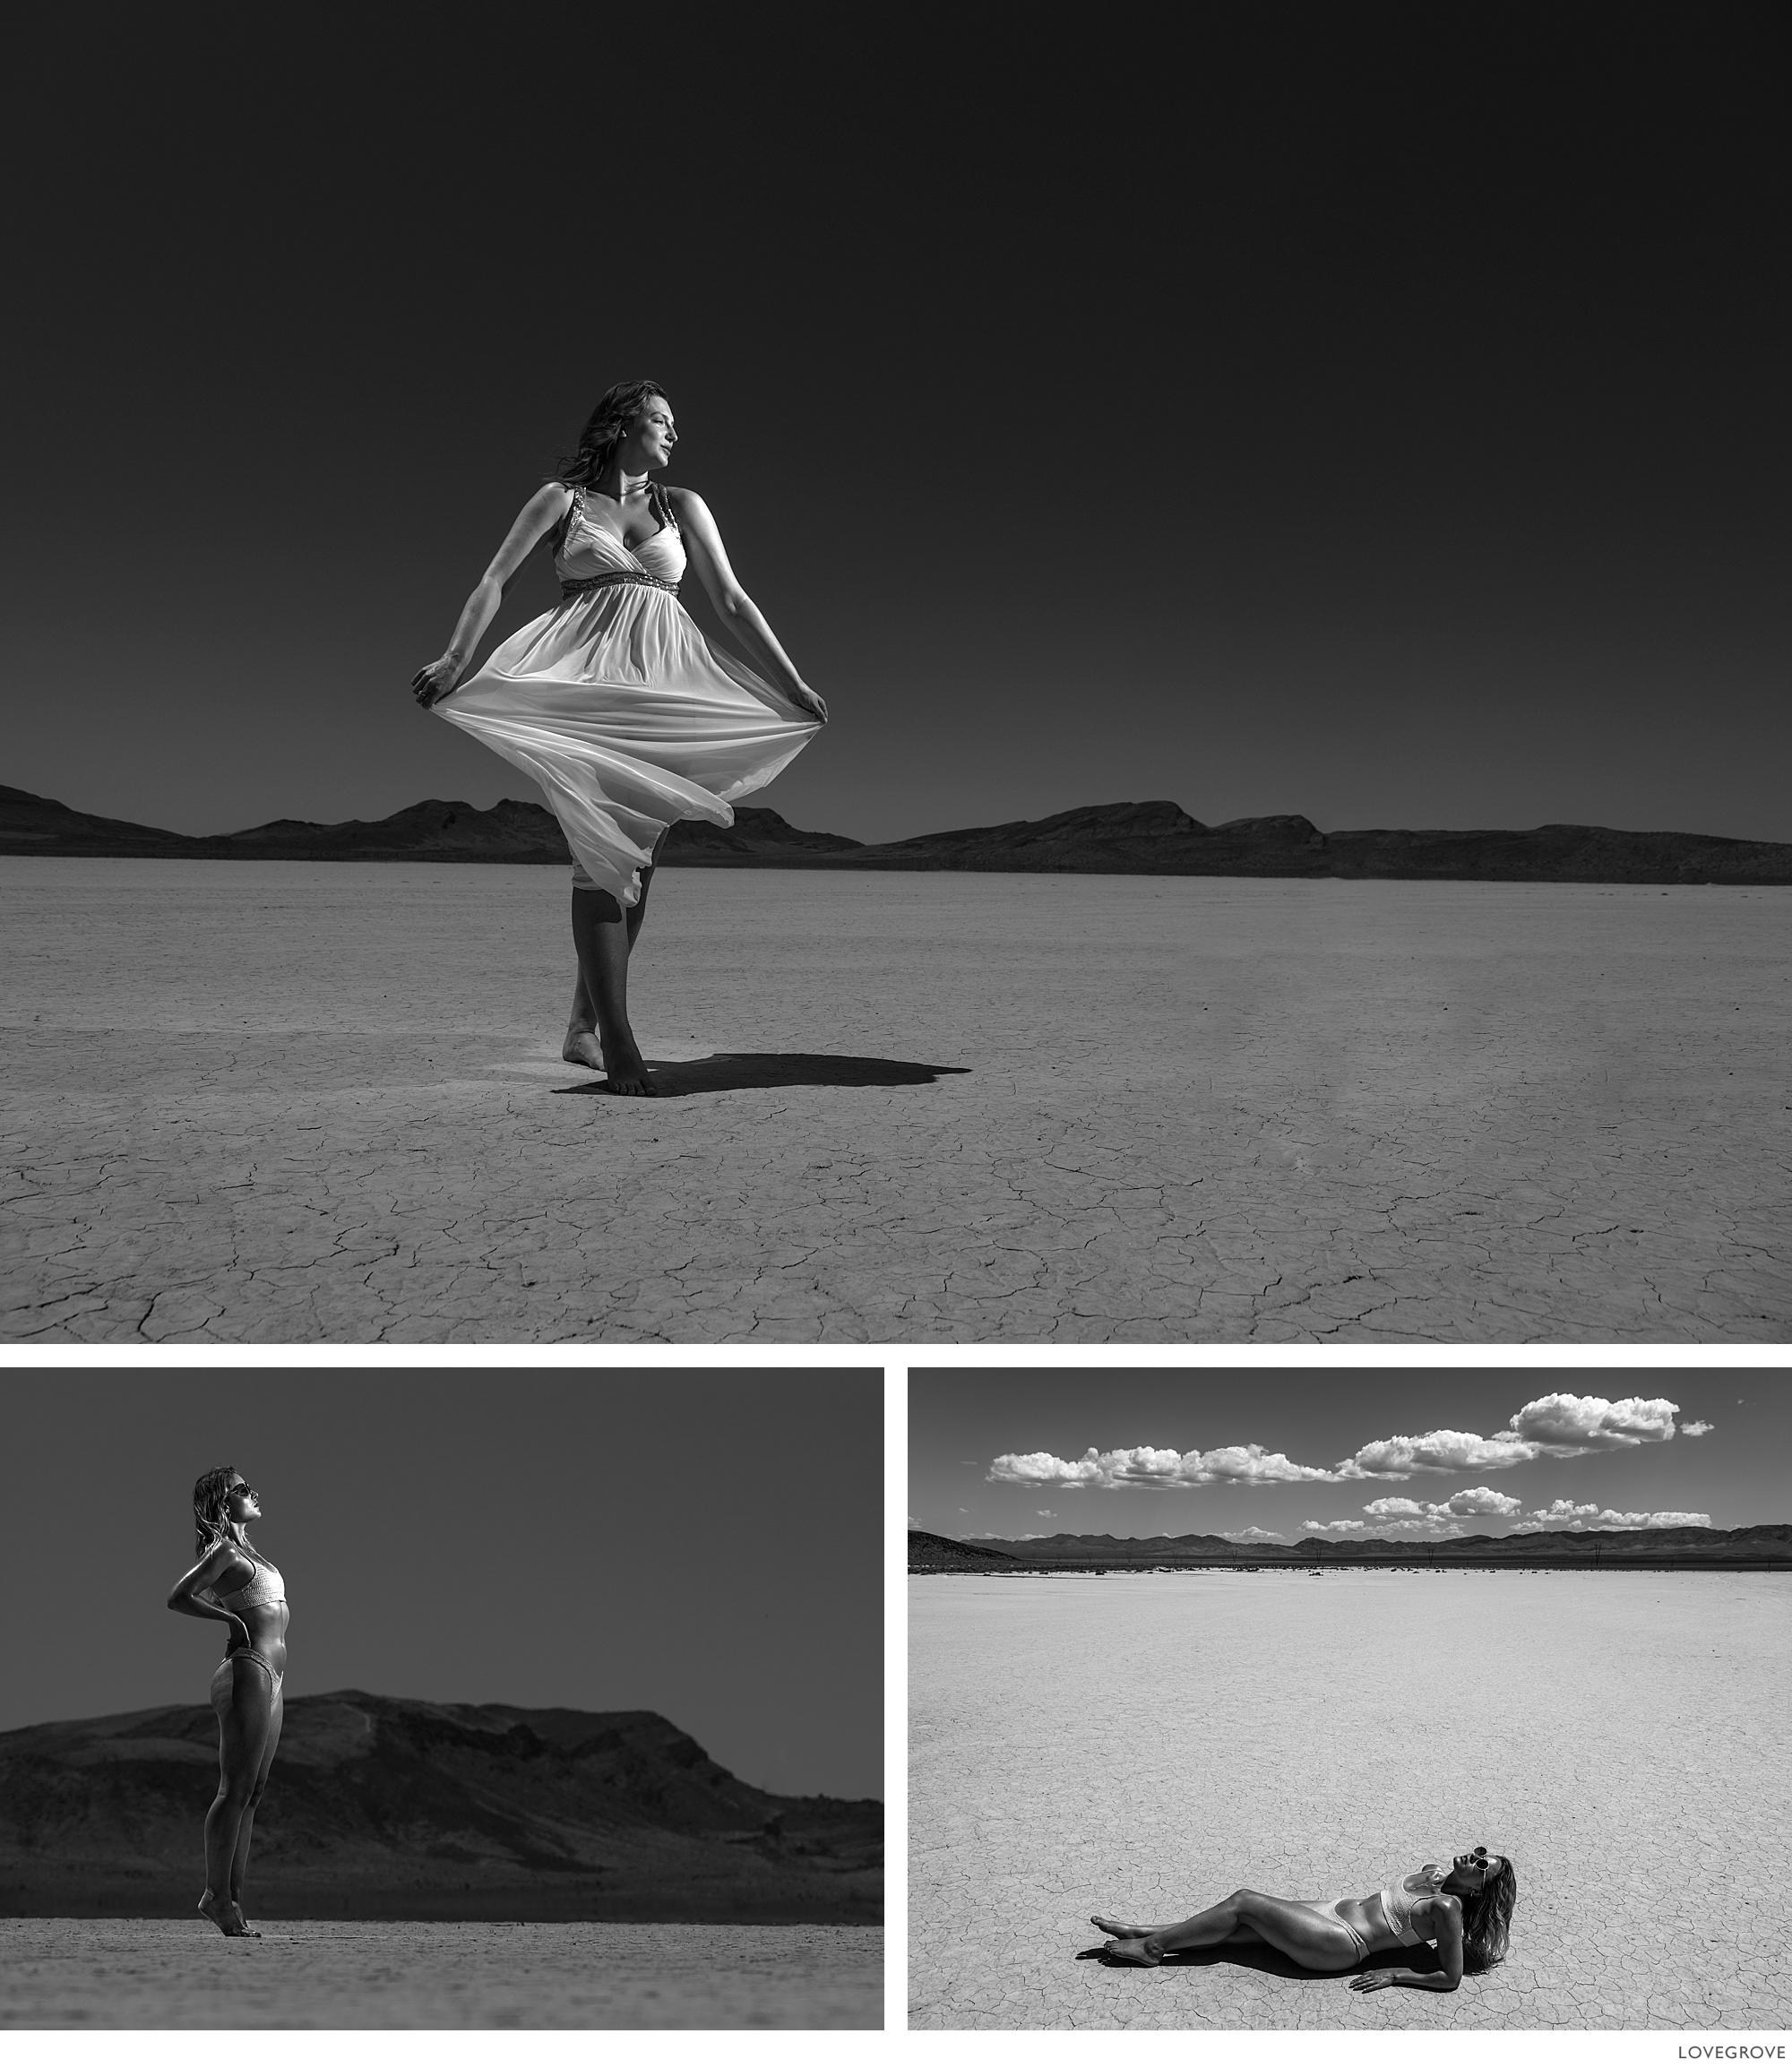 Portraits taken on a dry lake bed in Nevada in the heat of the day.